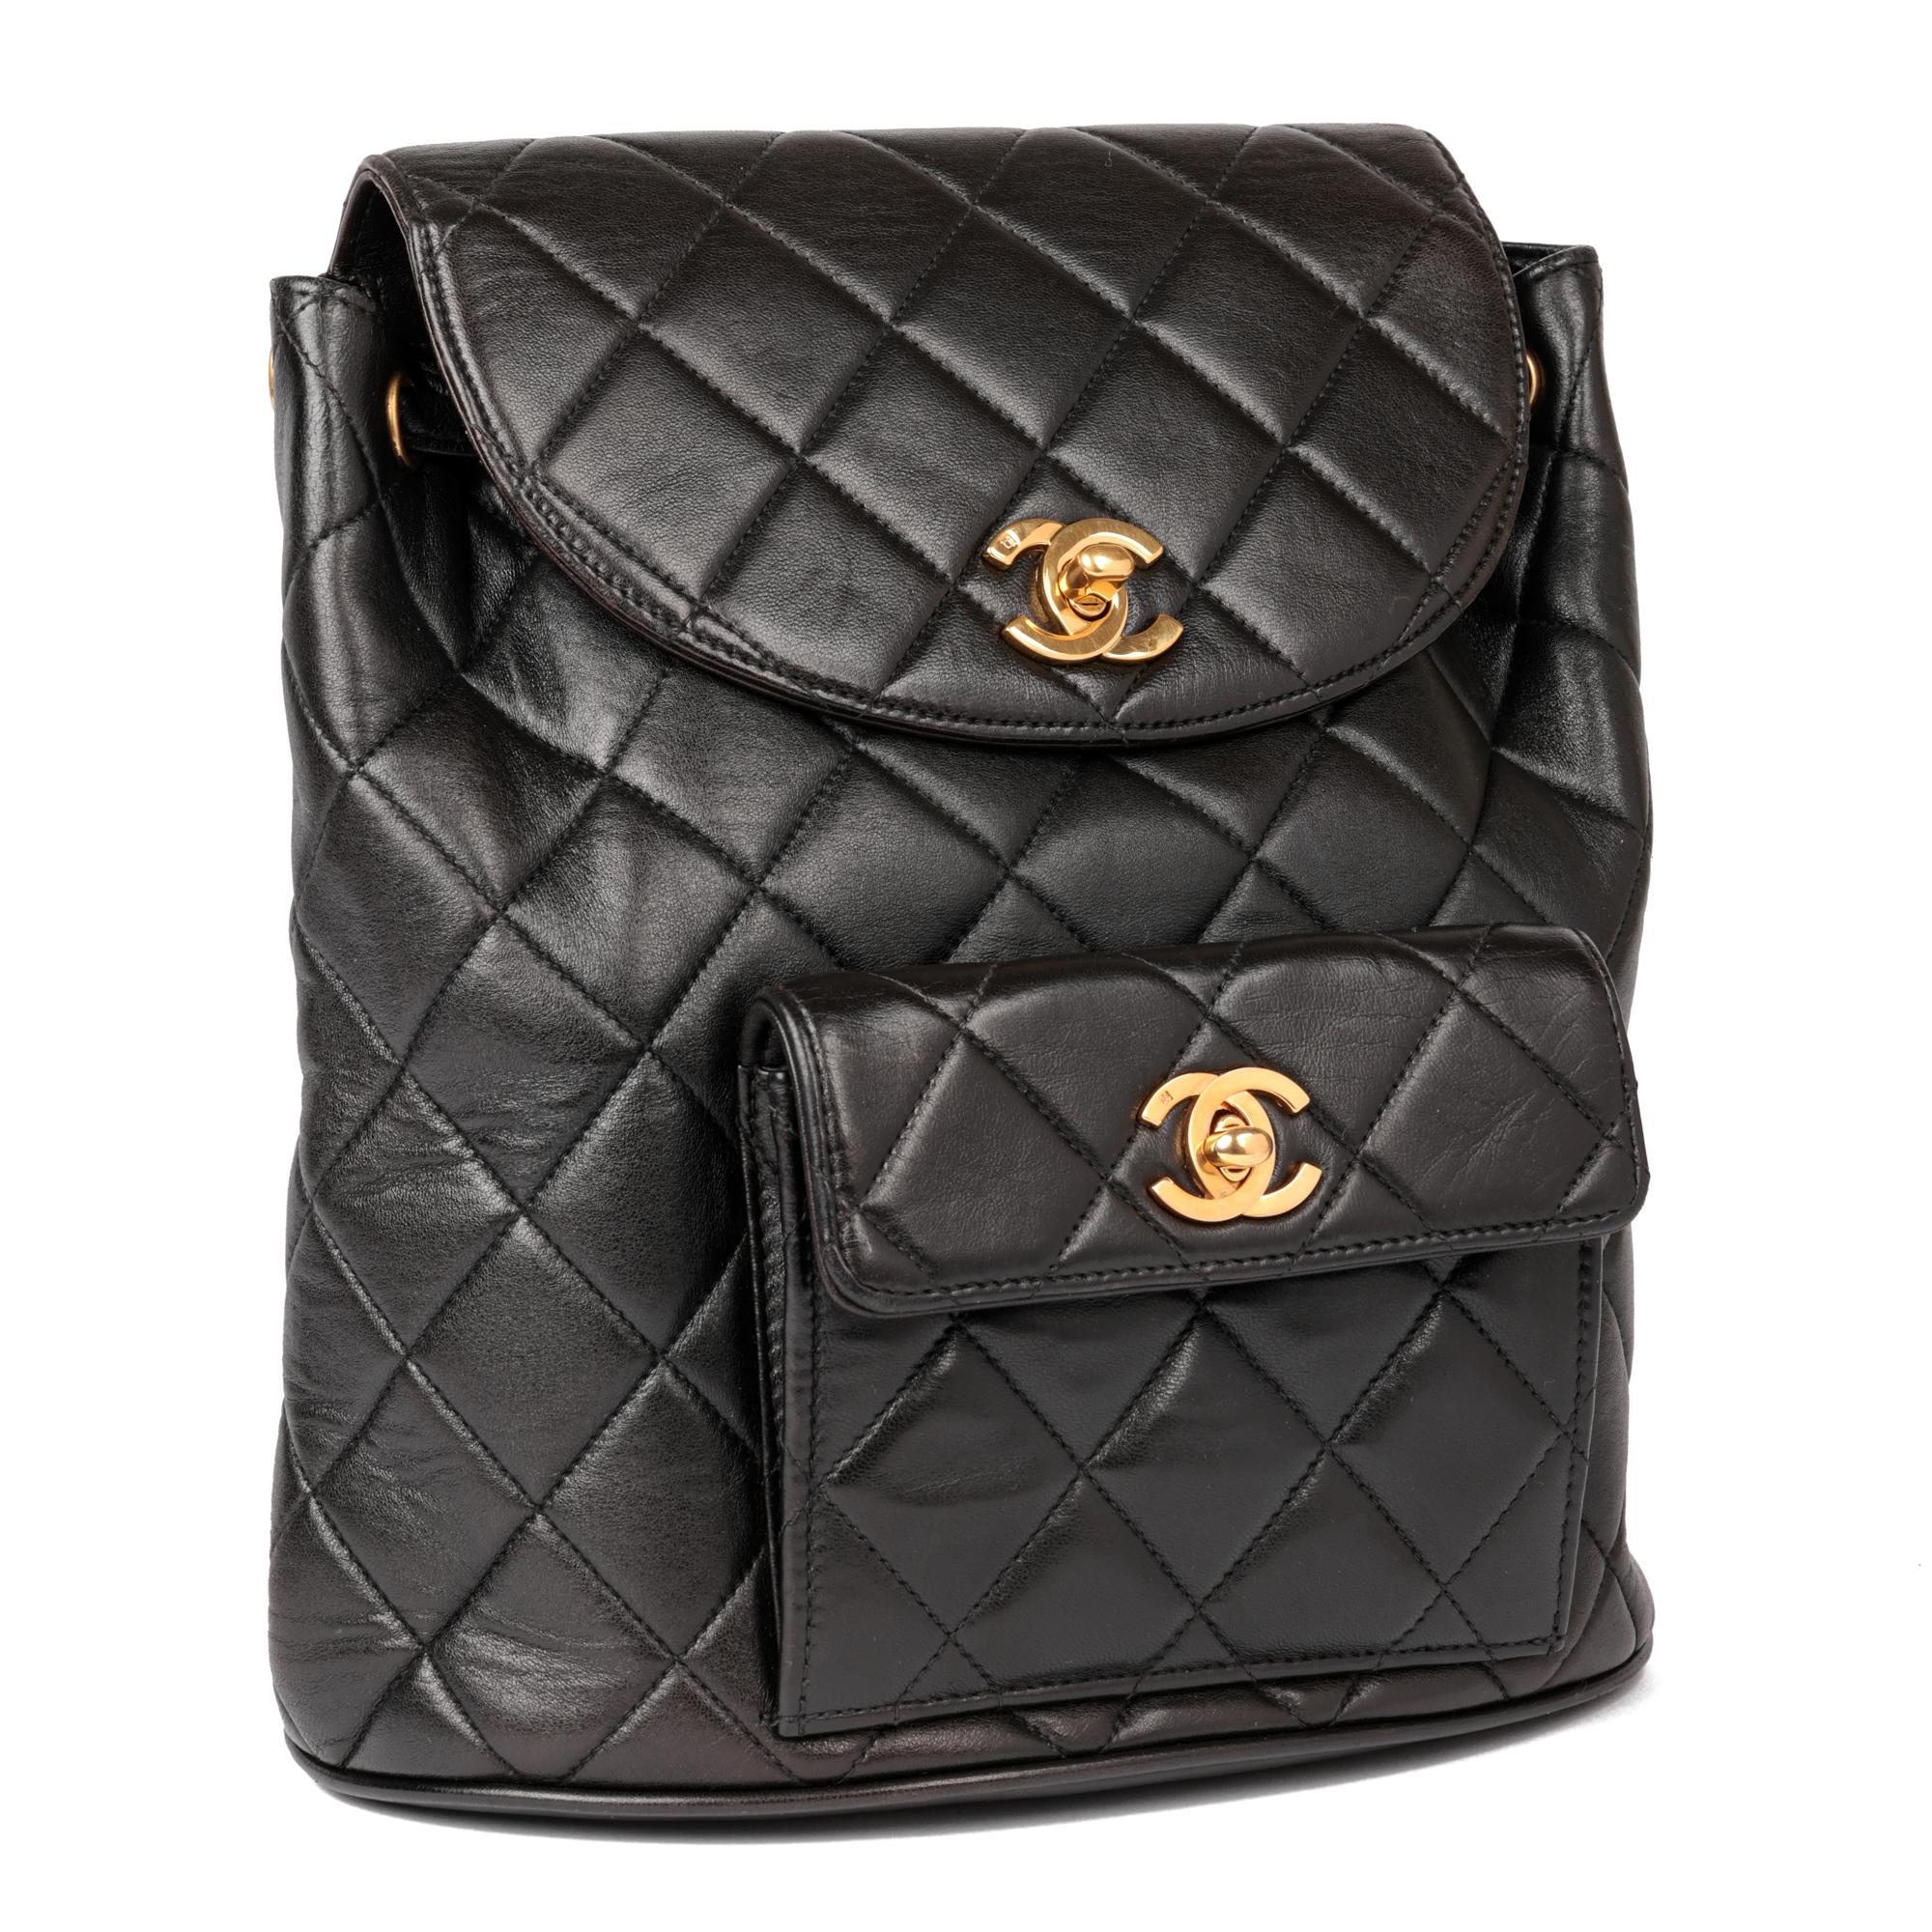 CHANEL
Black Quilted Lambskin Vintage Classic Duma Backpack

Xupes Reference: HB5118
Serial Number: 3287446
Age (Circa): 1996
Accompanied By: Chanel Dust Bag, Authenticity Card
Authenticity Details: Authenticity Card, Serial Sticker (Made in